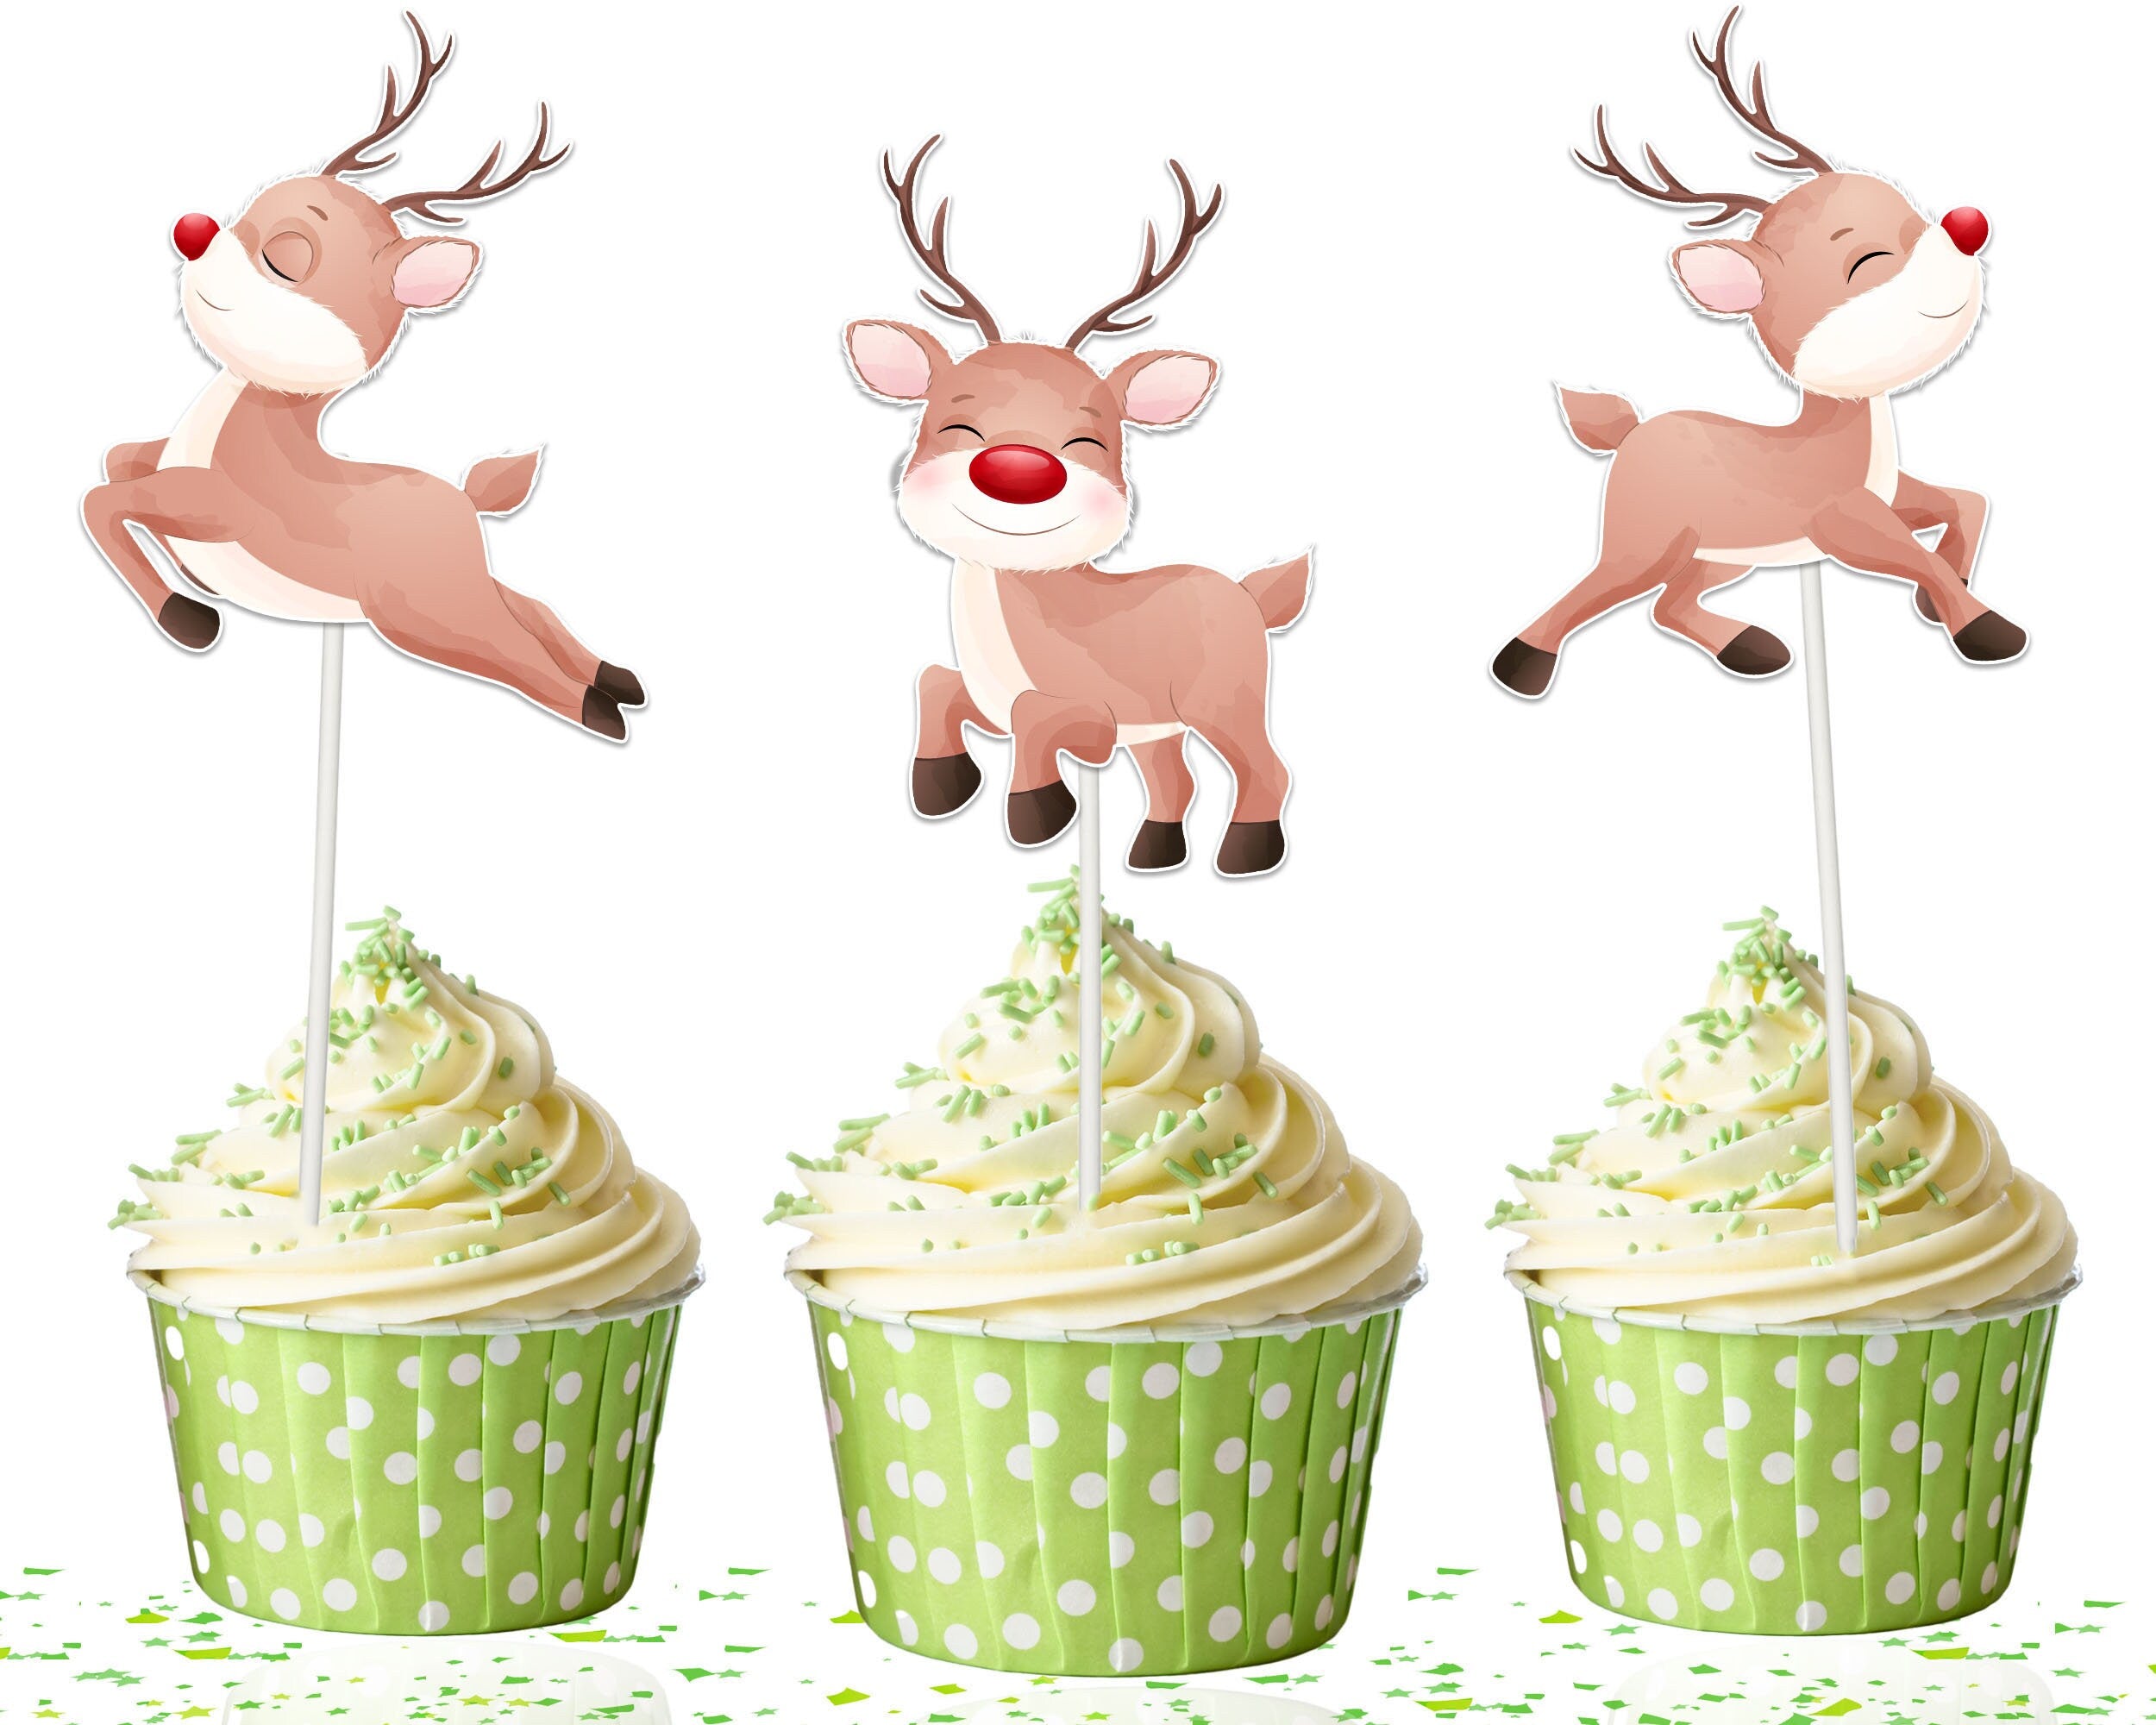 Festive Red-Nosed Reindeer Cupcake Toppers - Make Your Holiday Treats Dasher-ingly Delightful